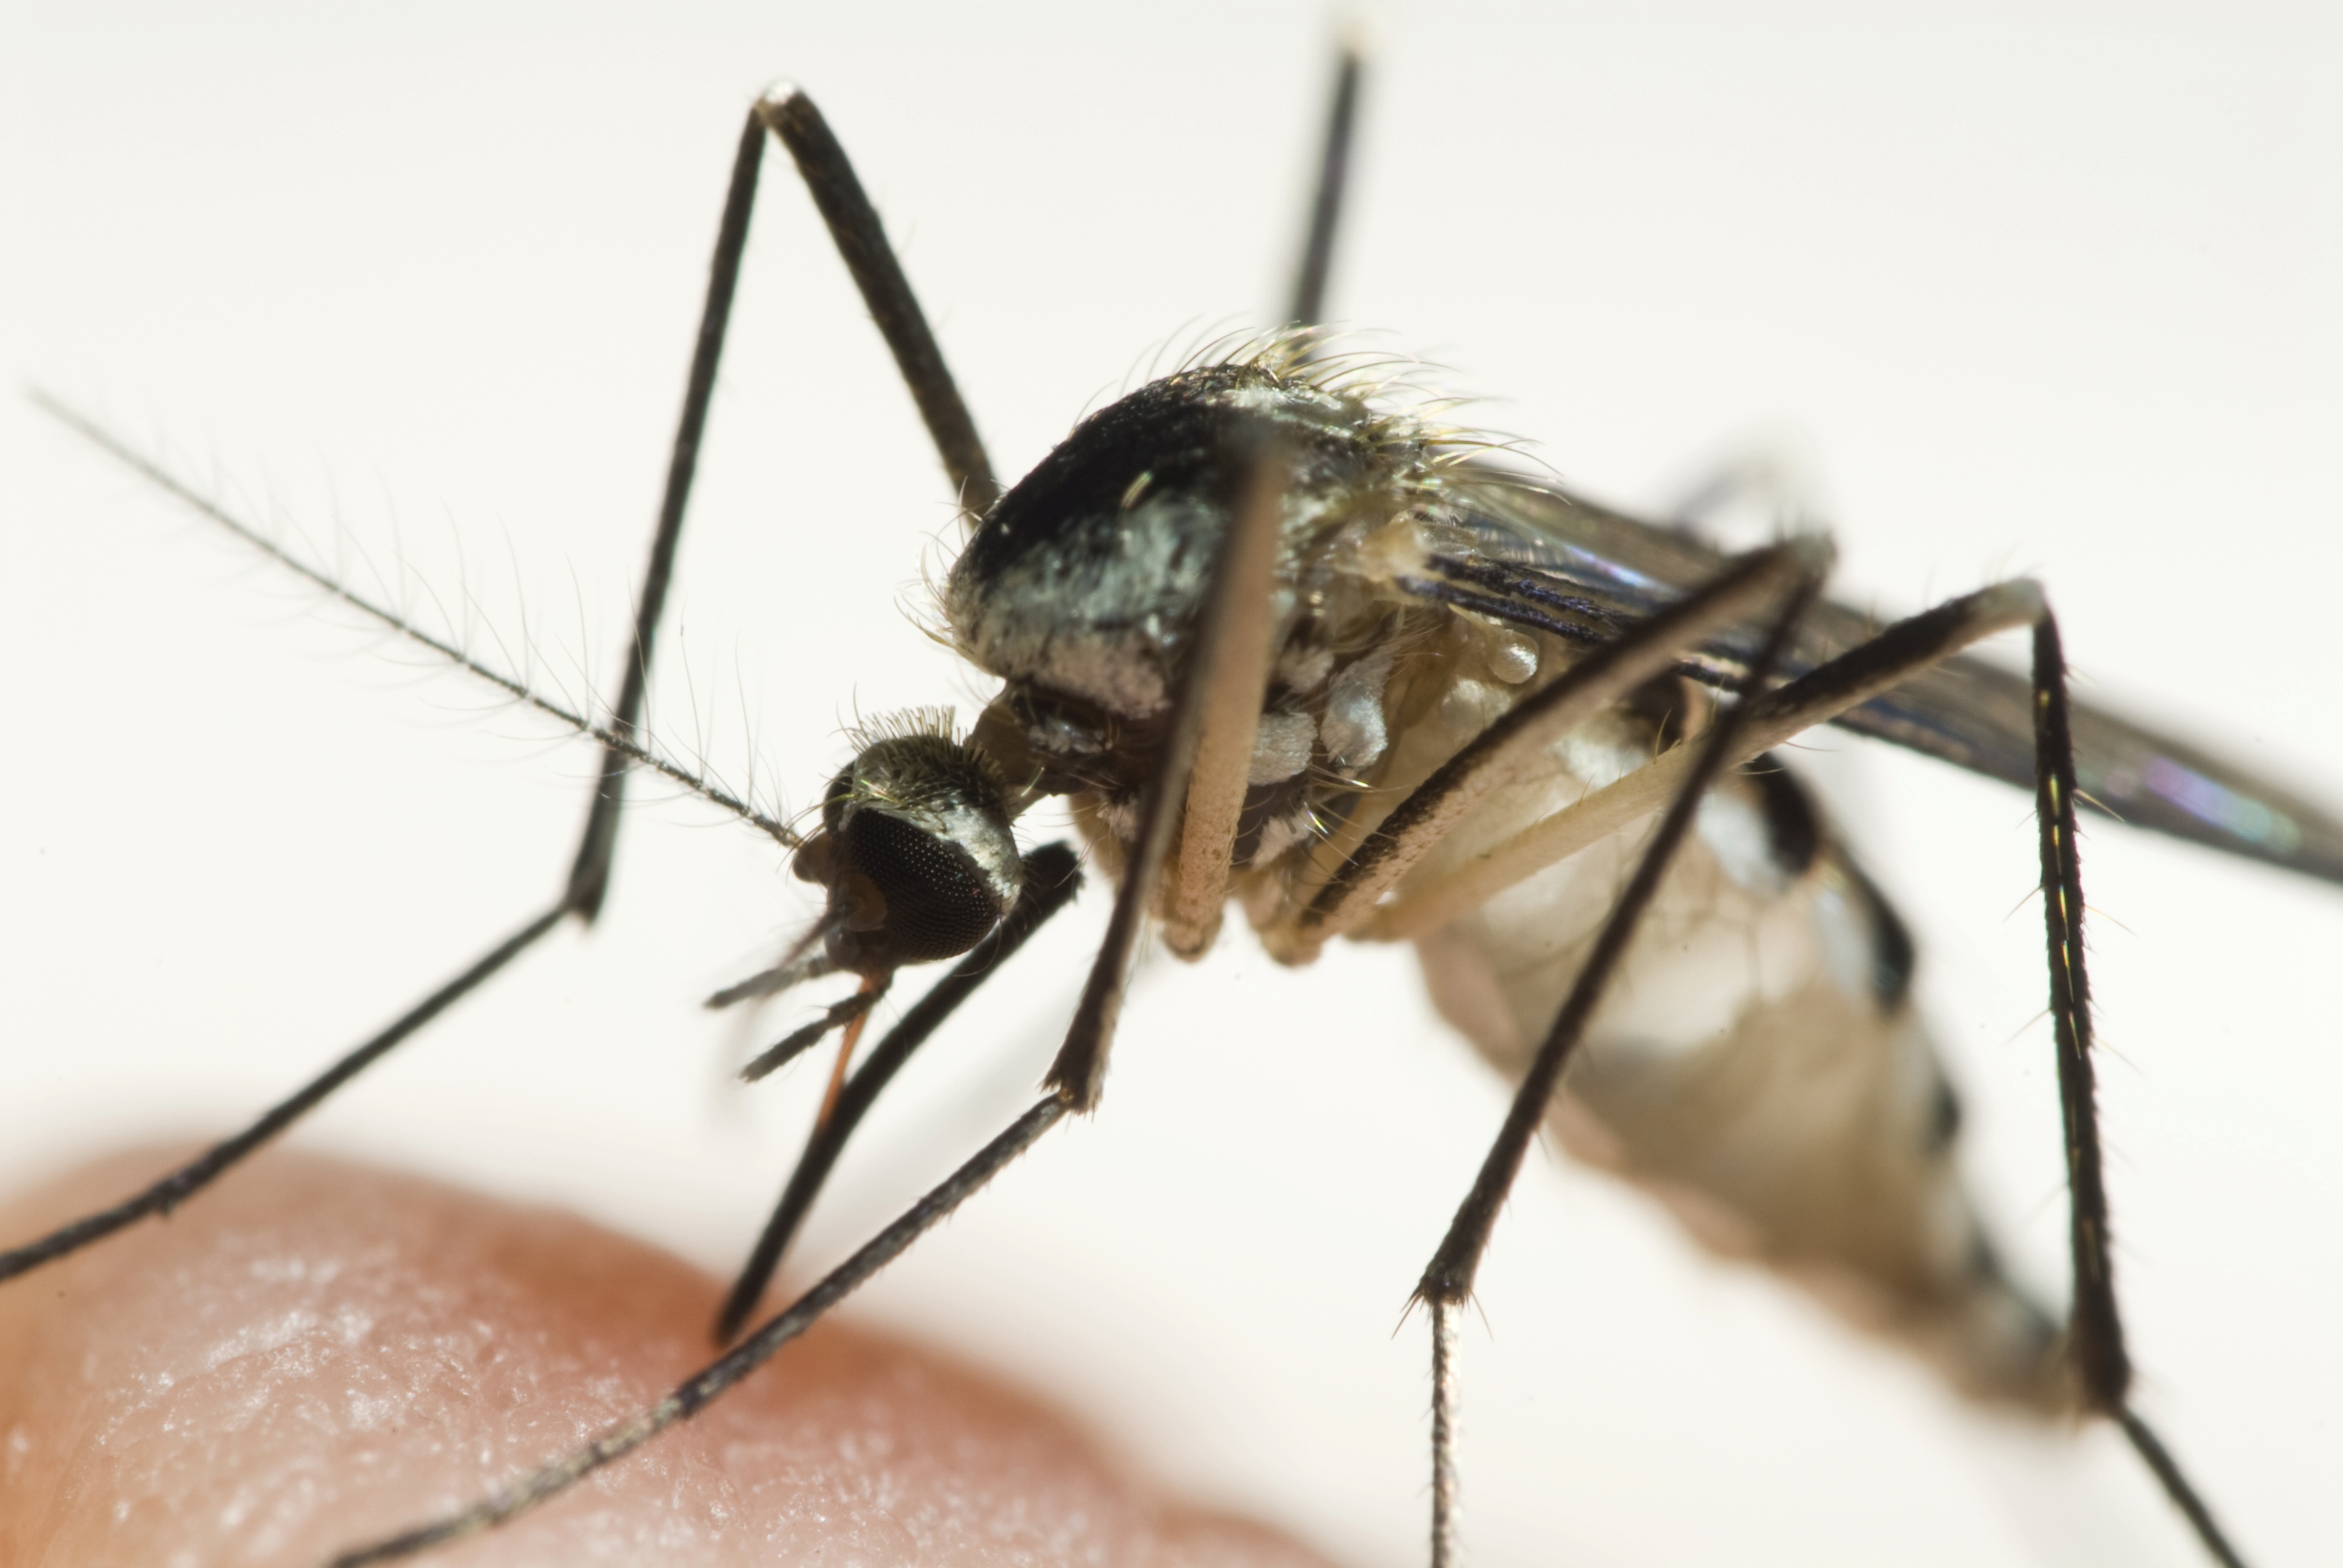 Extreme closeup of mosquito found prior to providing Mosquito Control in Prospect